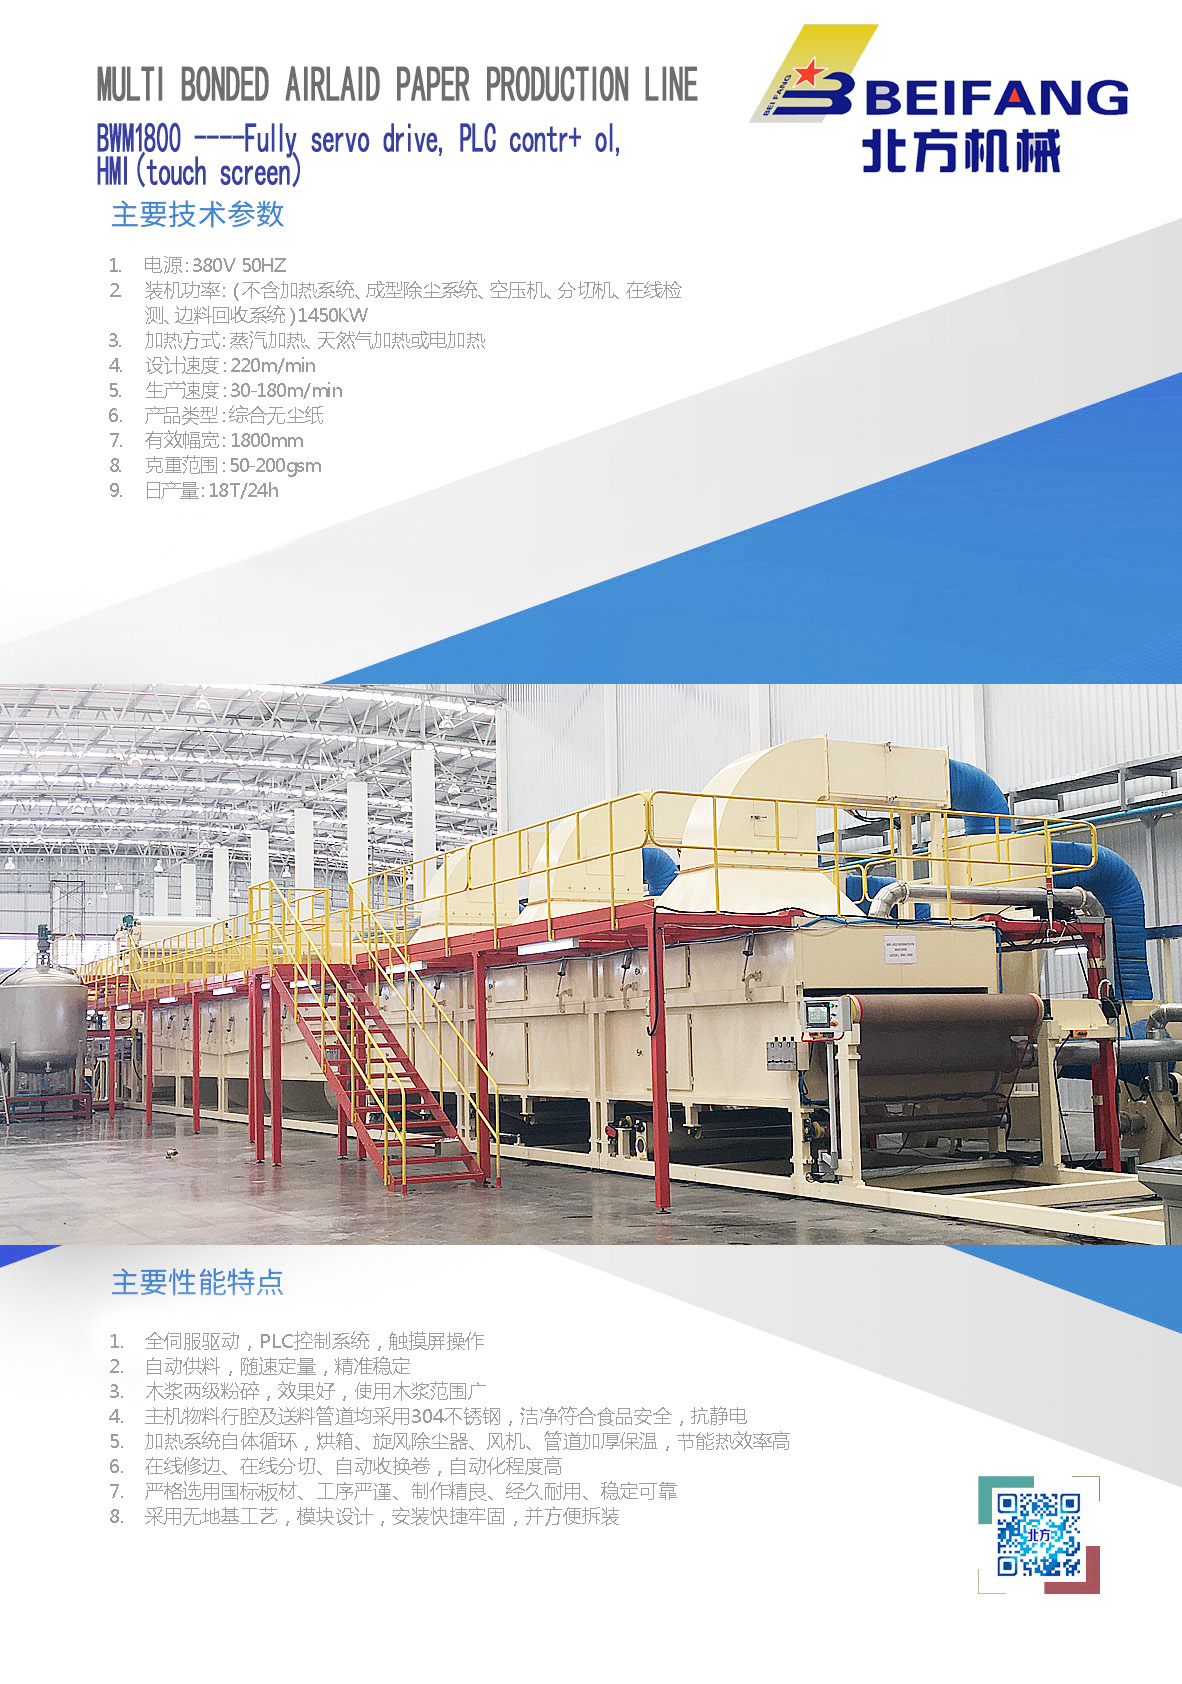 MULTI BONDED AIRLAID PAPER PRODUCTION LINE